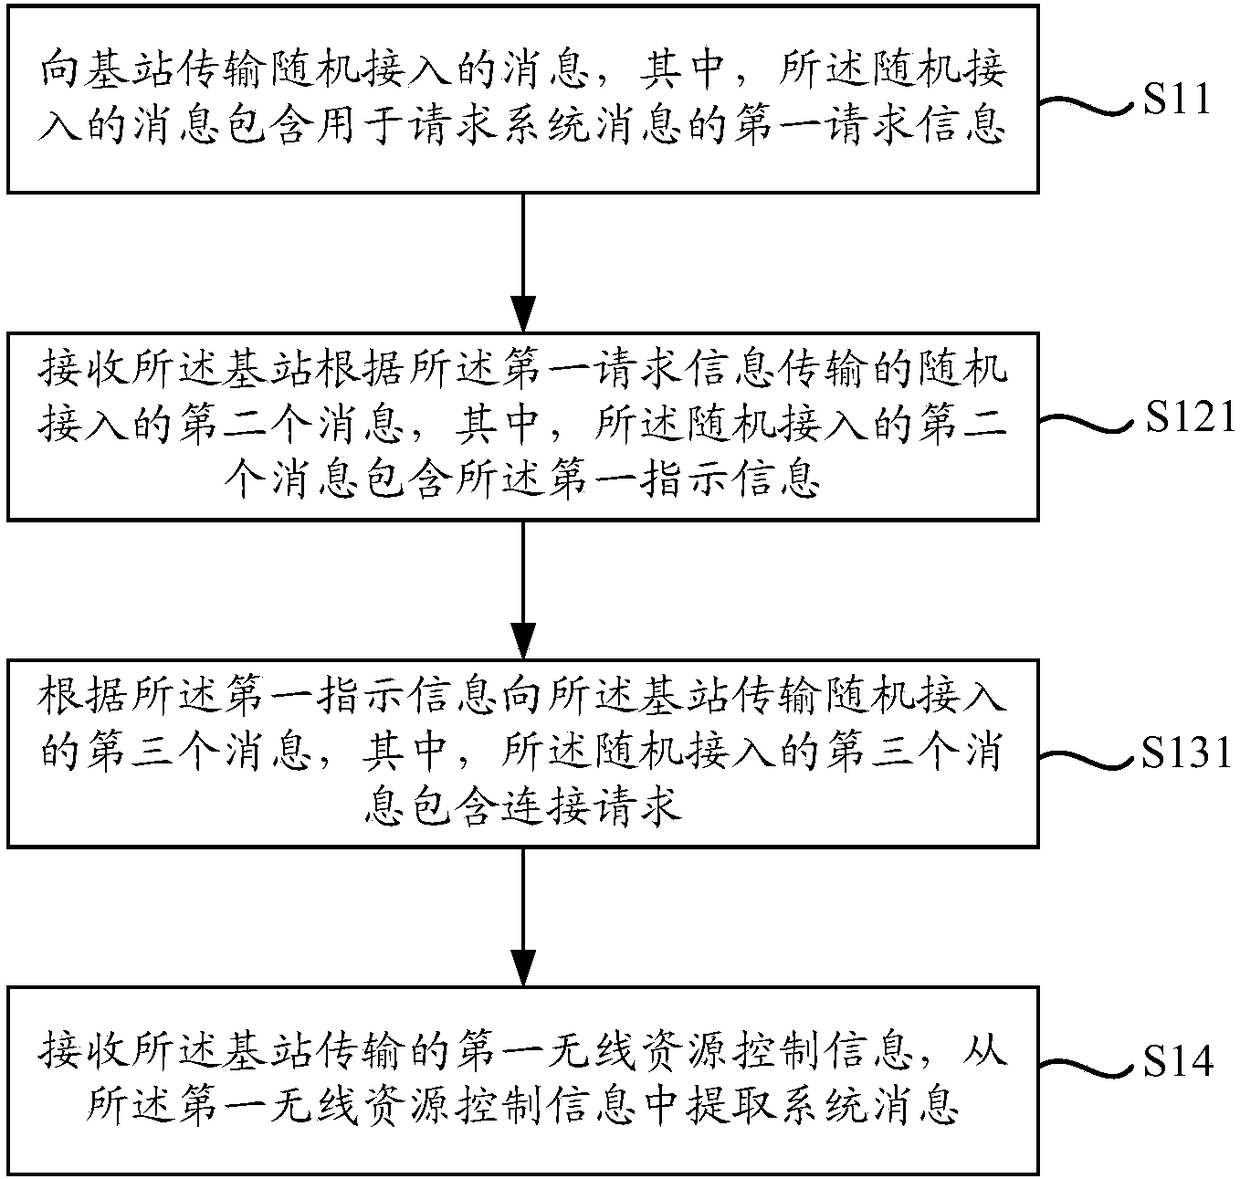 System message acquisition method and apparatus, and system message transmission method and apparatus